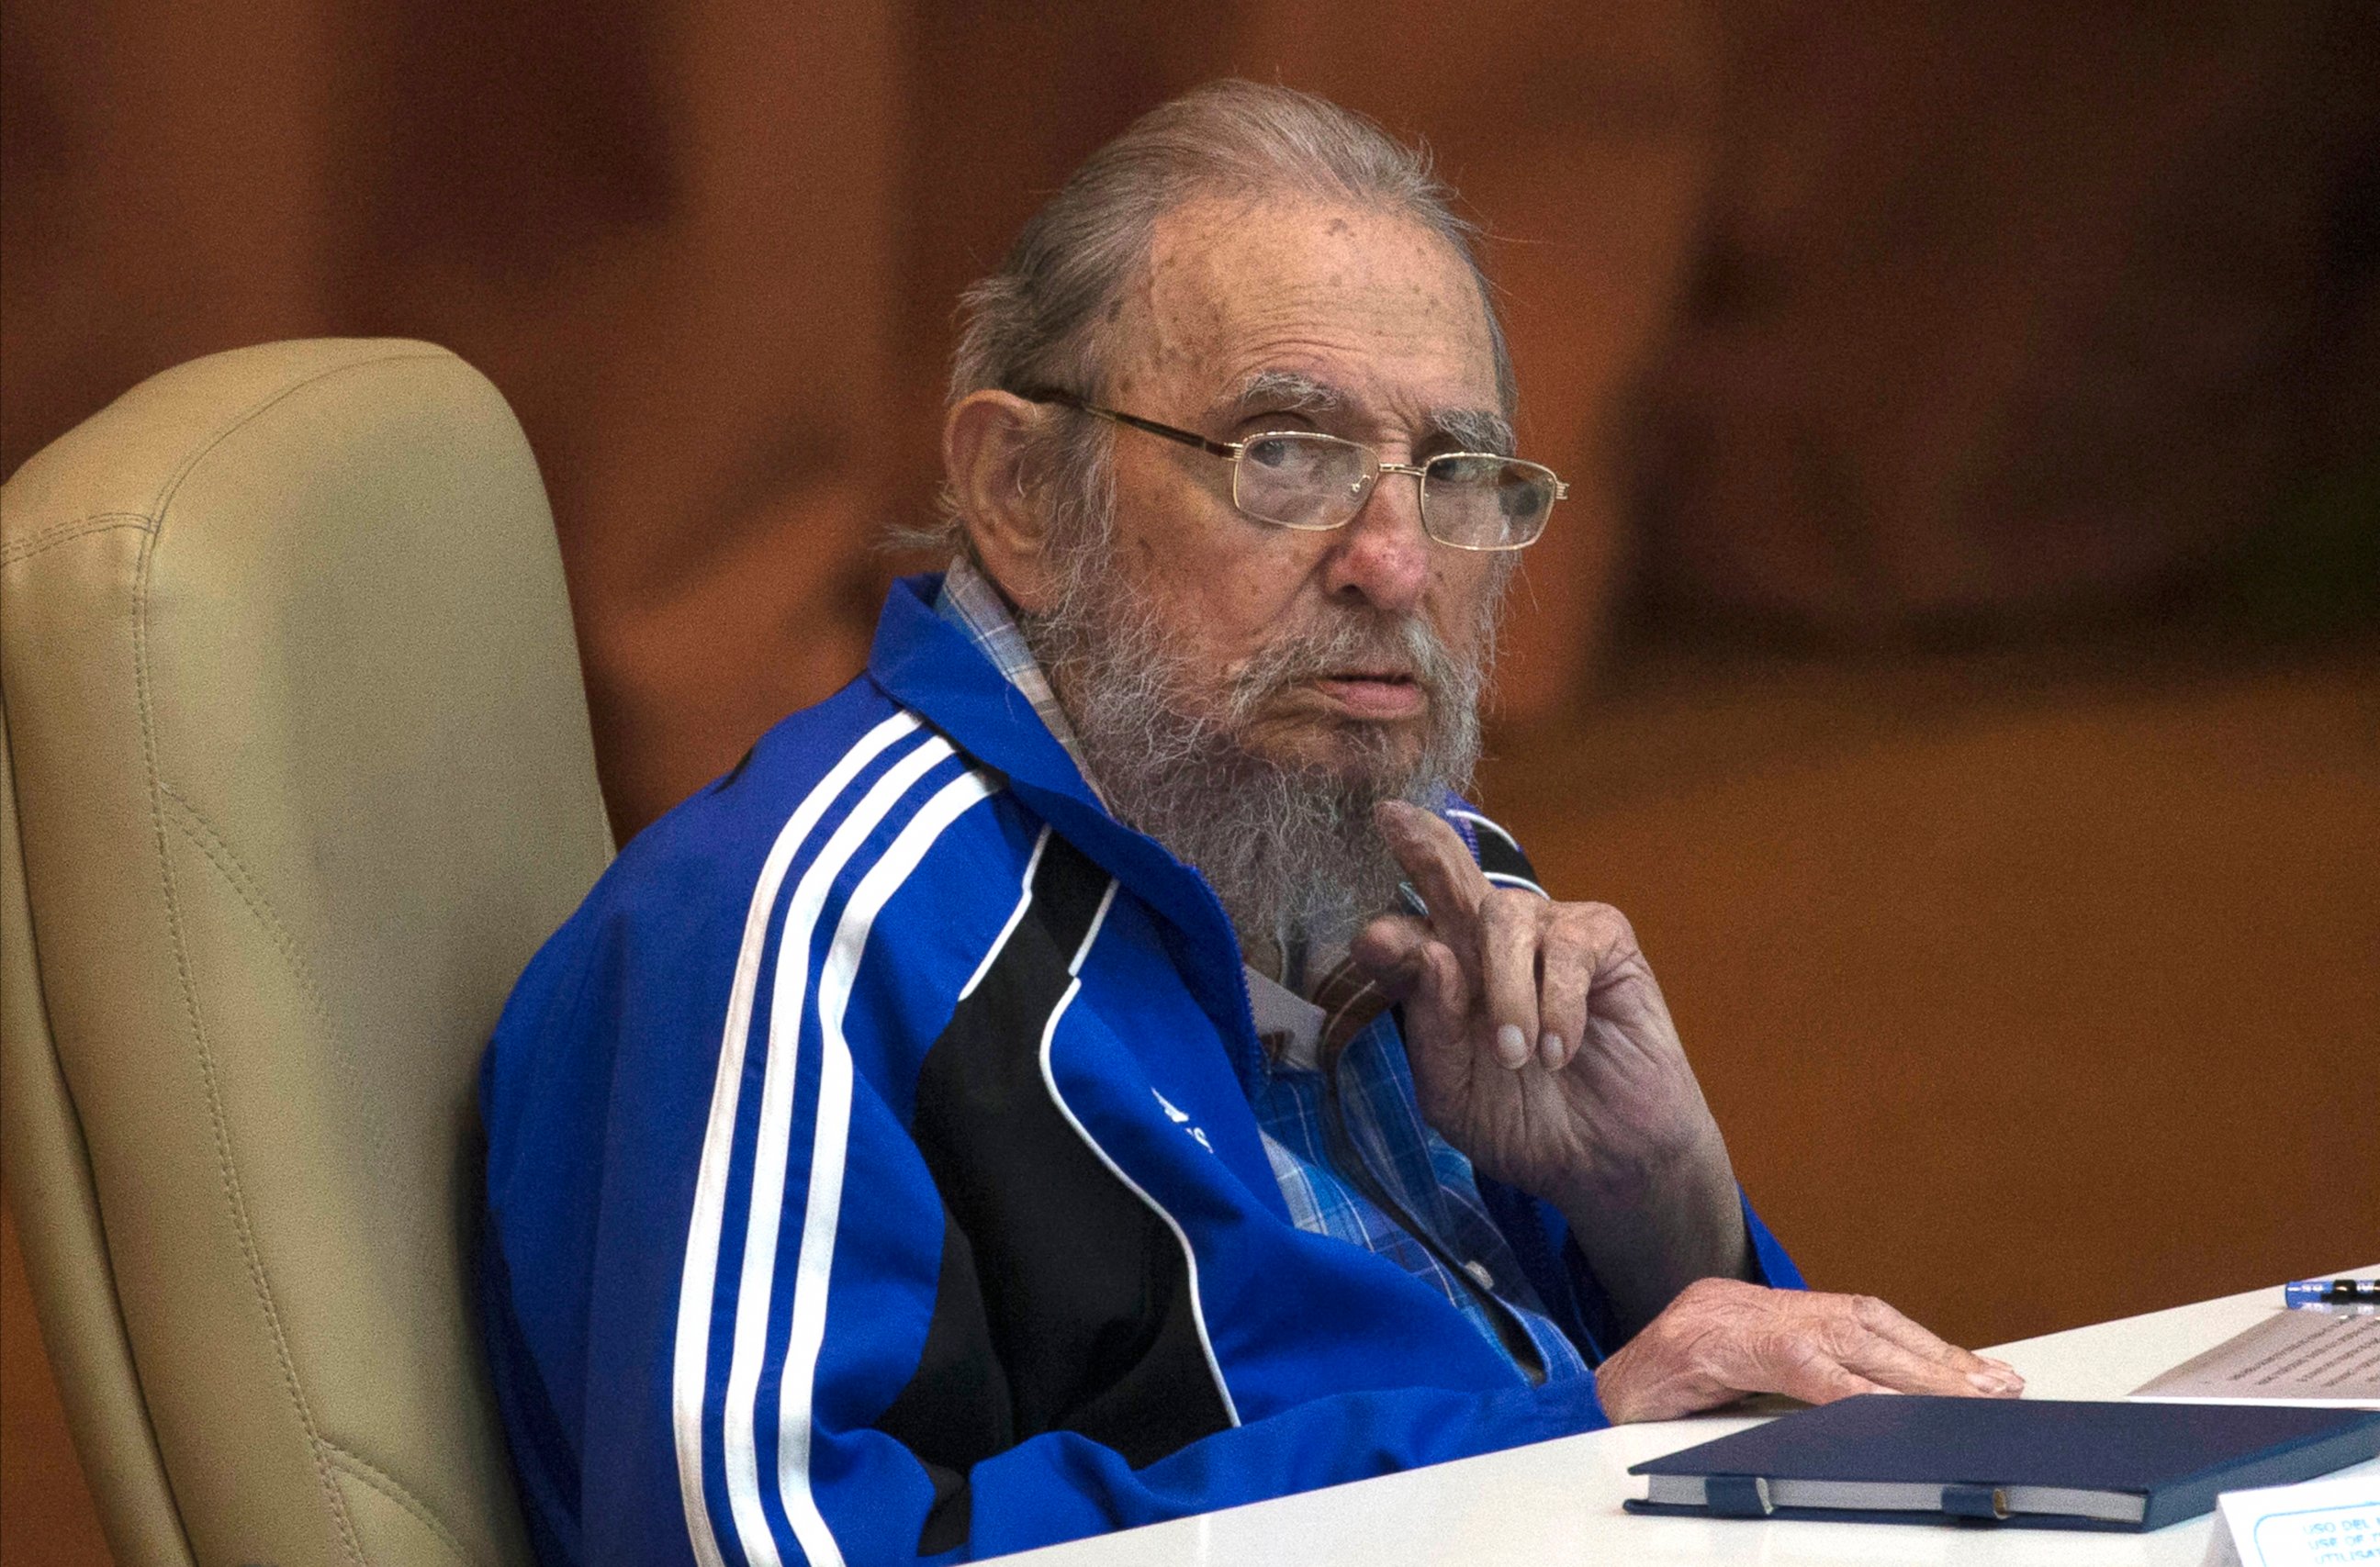 PHOTO: Fidel Castro attends the last day of the 7th Cuban Communist Party Congress in Havana, Cuba, on April 19, 2016.